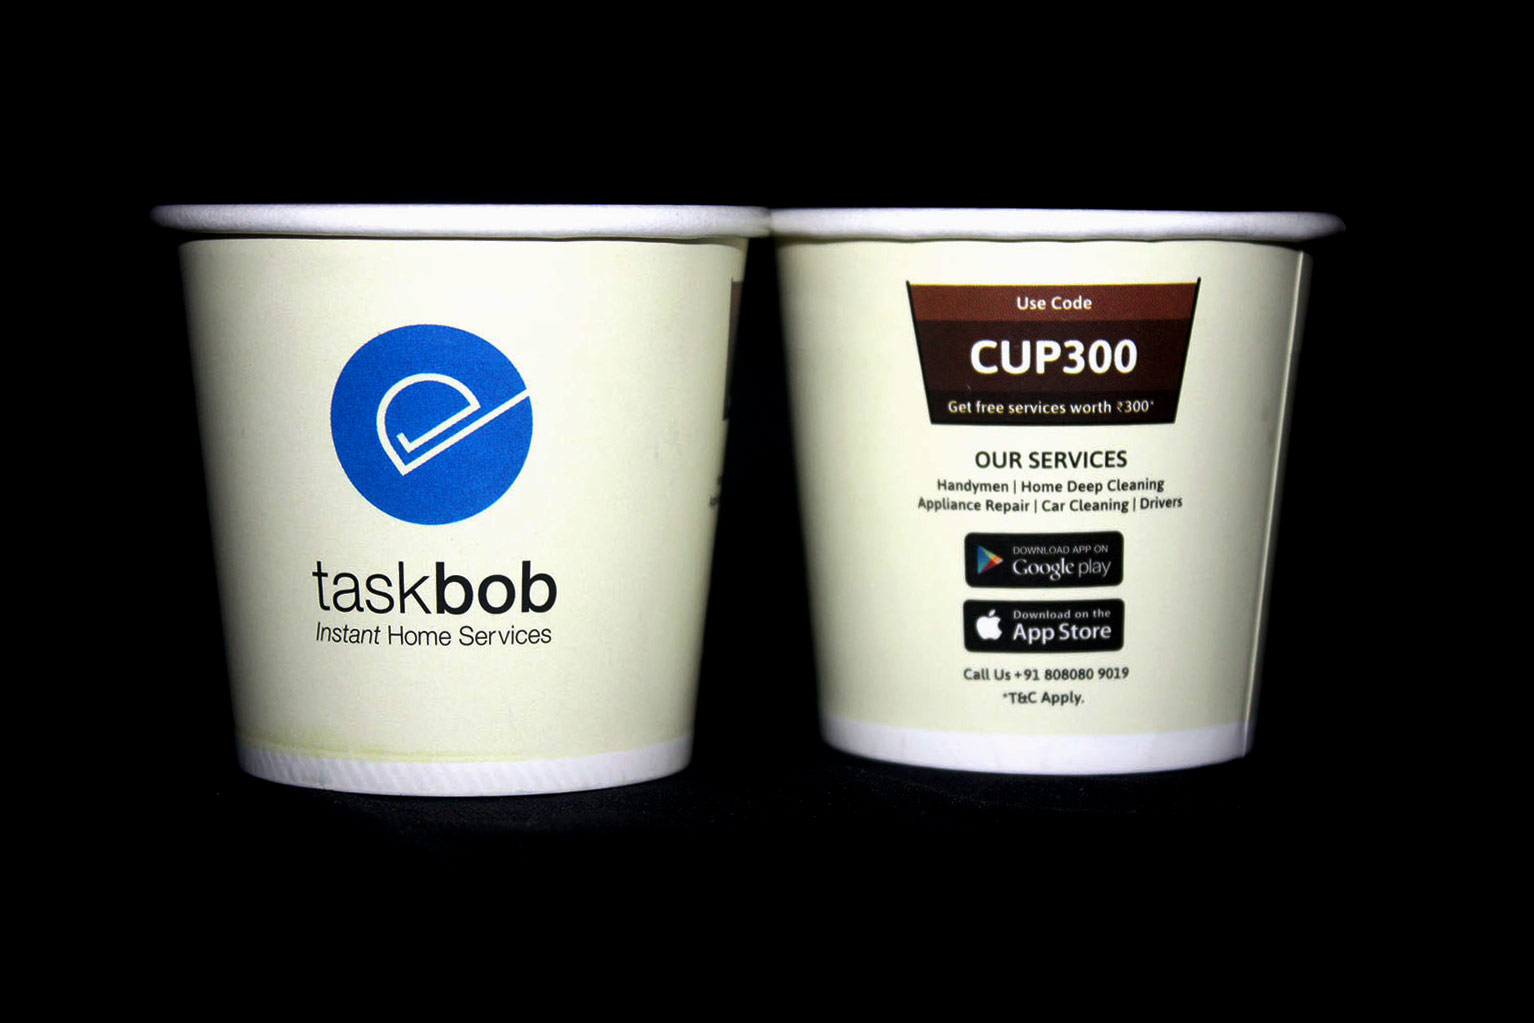 Paper cups for the campaign of promotion of TaskBob